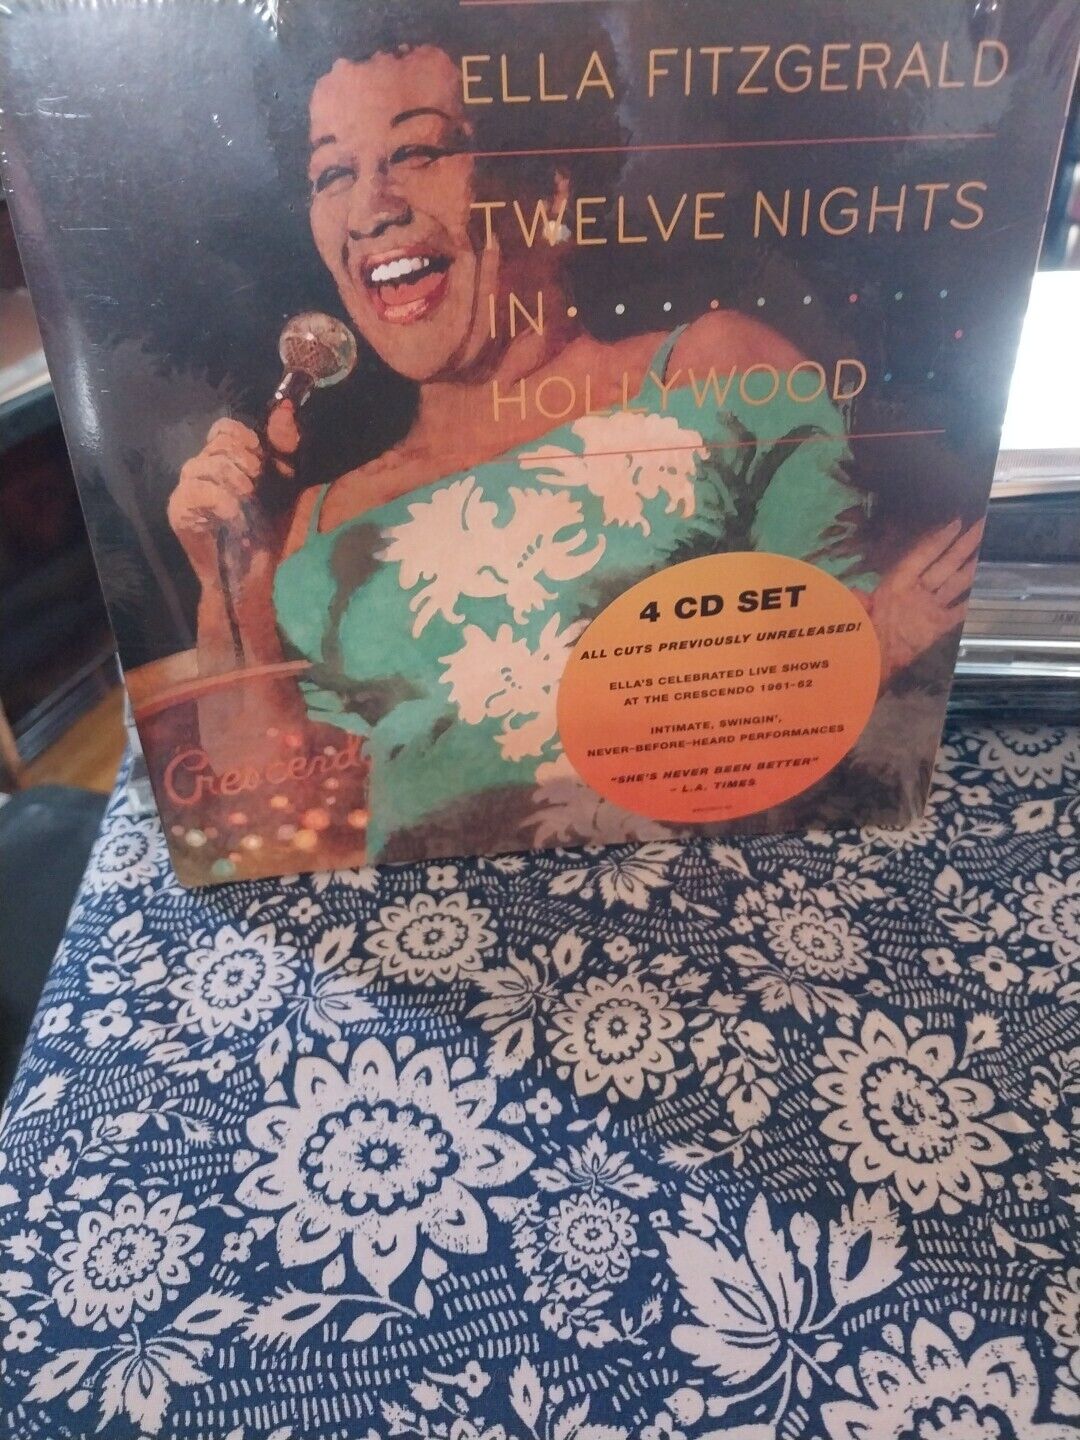 Twelve Nights in Hollywood by Ella Fitzgerald 4 CD BRAND NEW FACTORY SEALED